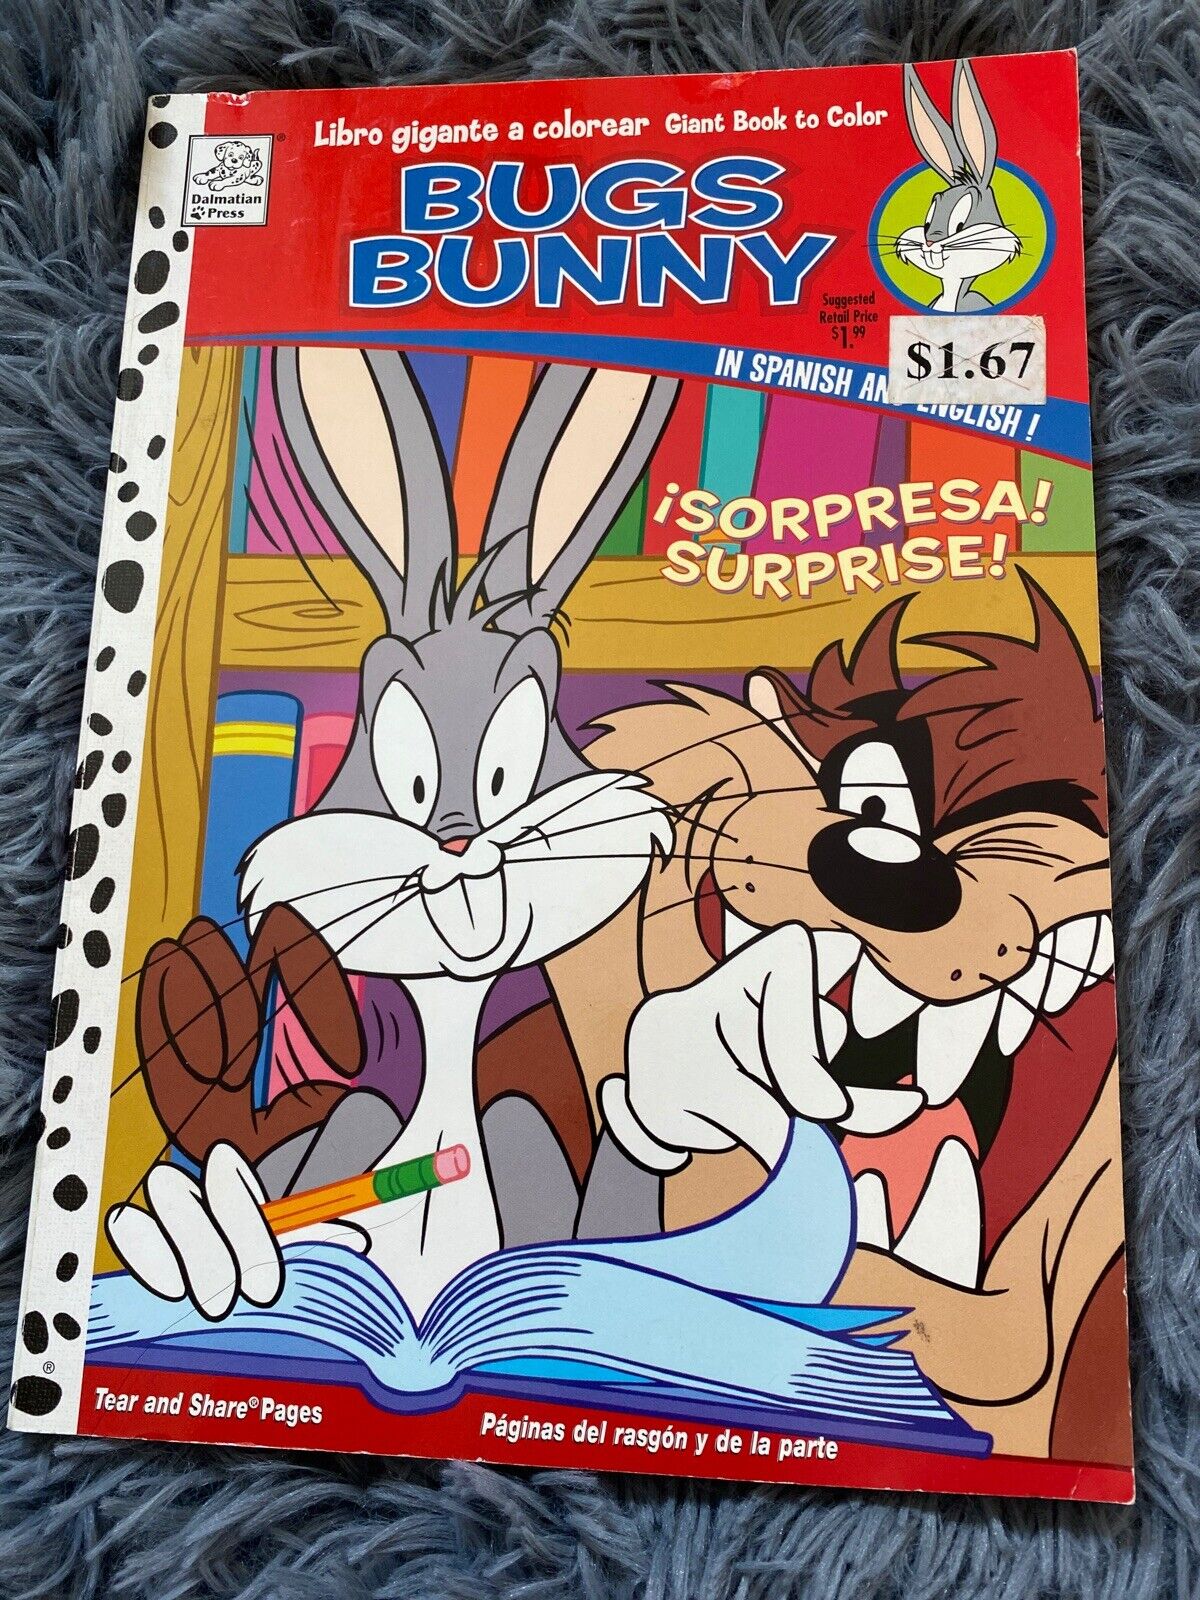 Bugs bunny vintage coloring book dalmation press giant book to color